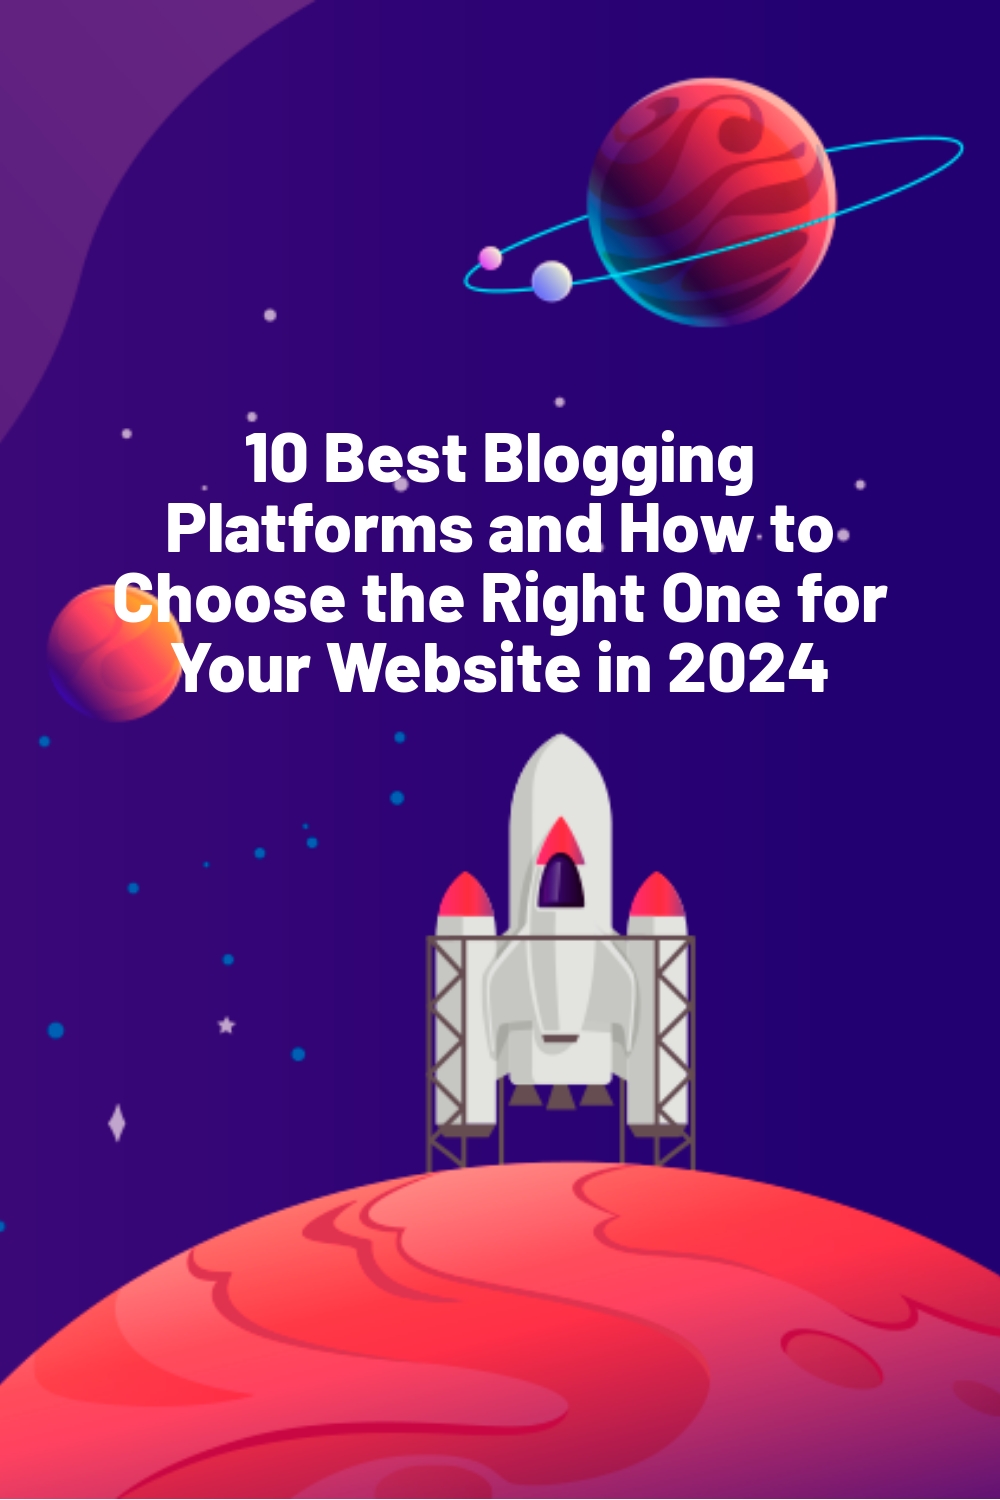 10 Best Blogging Platforms and How to Choose the Right One for Your Website in 2024